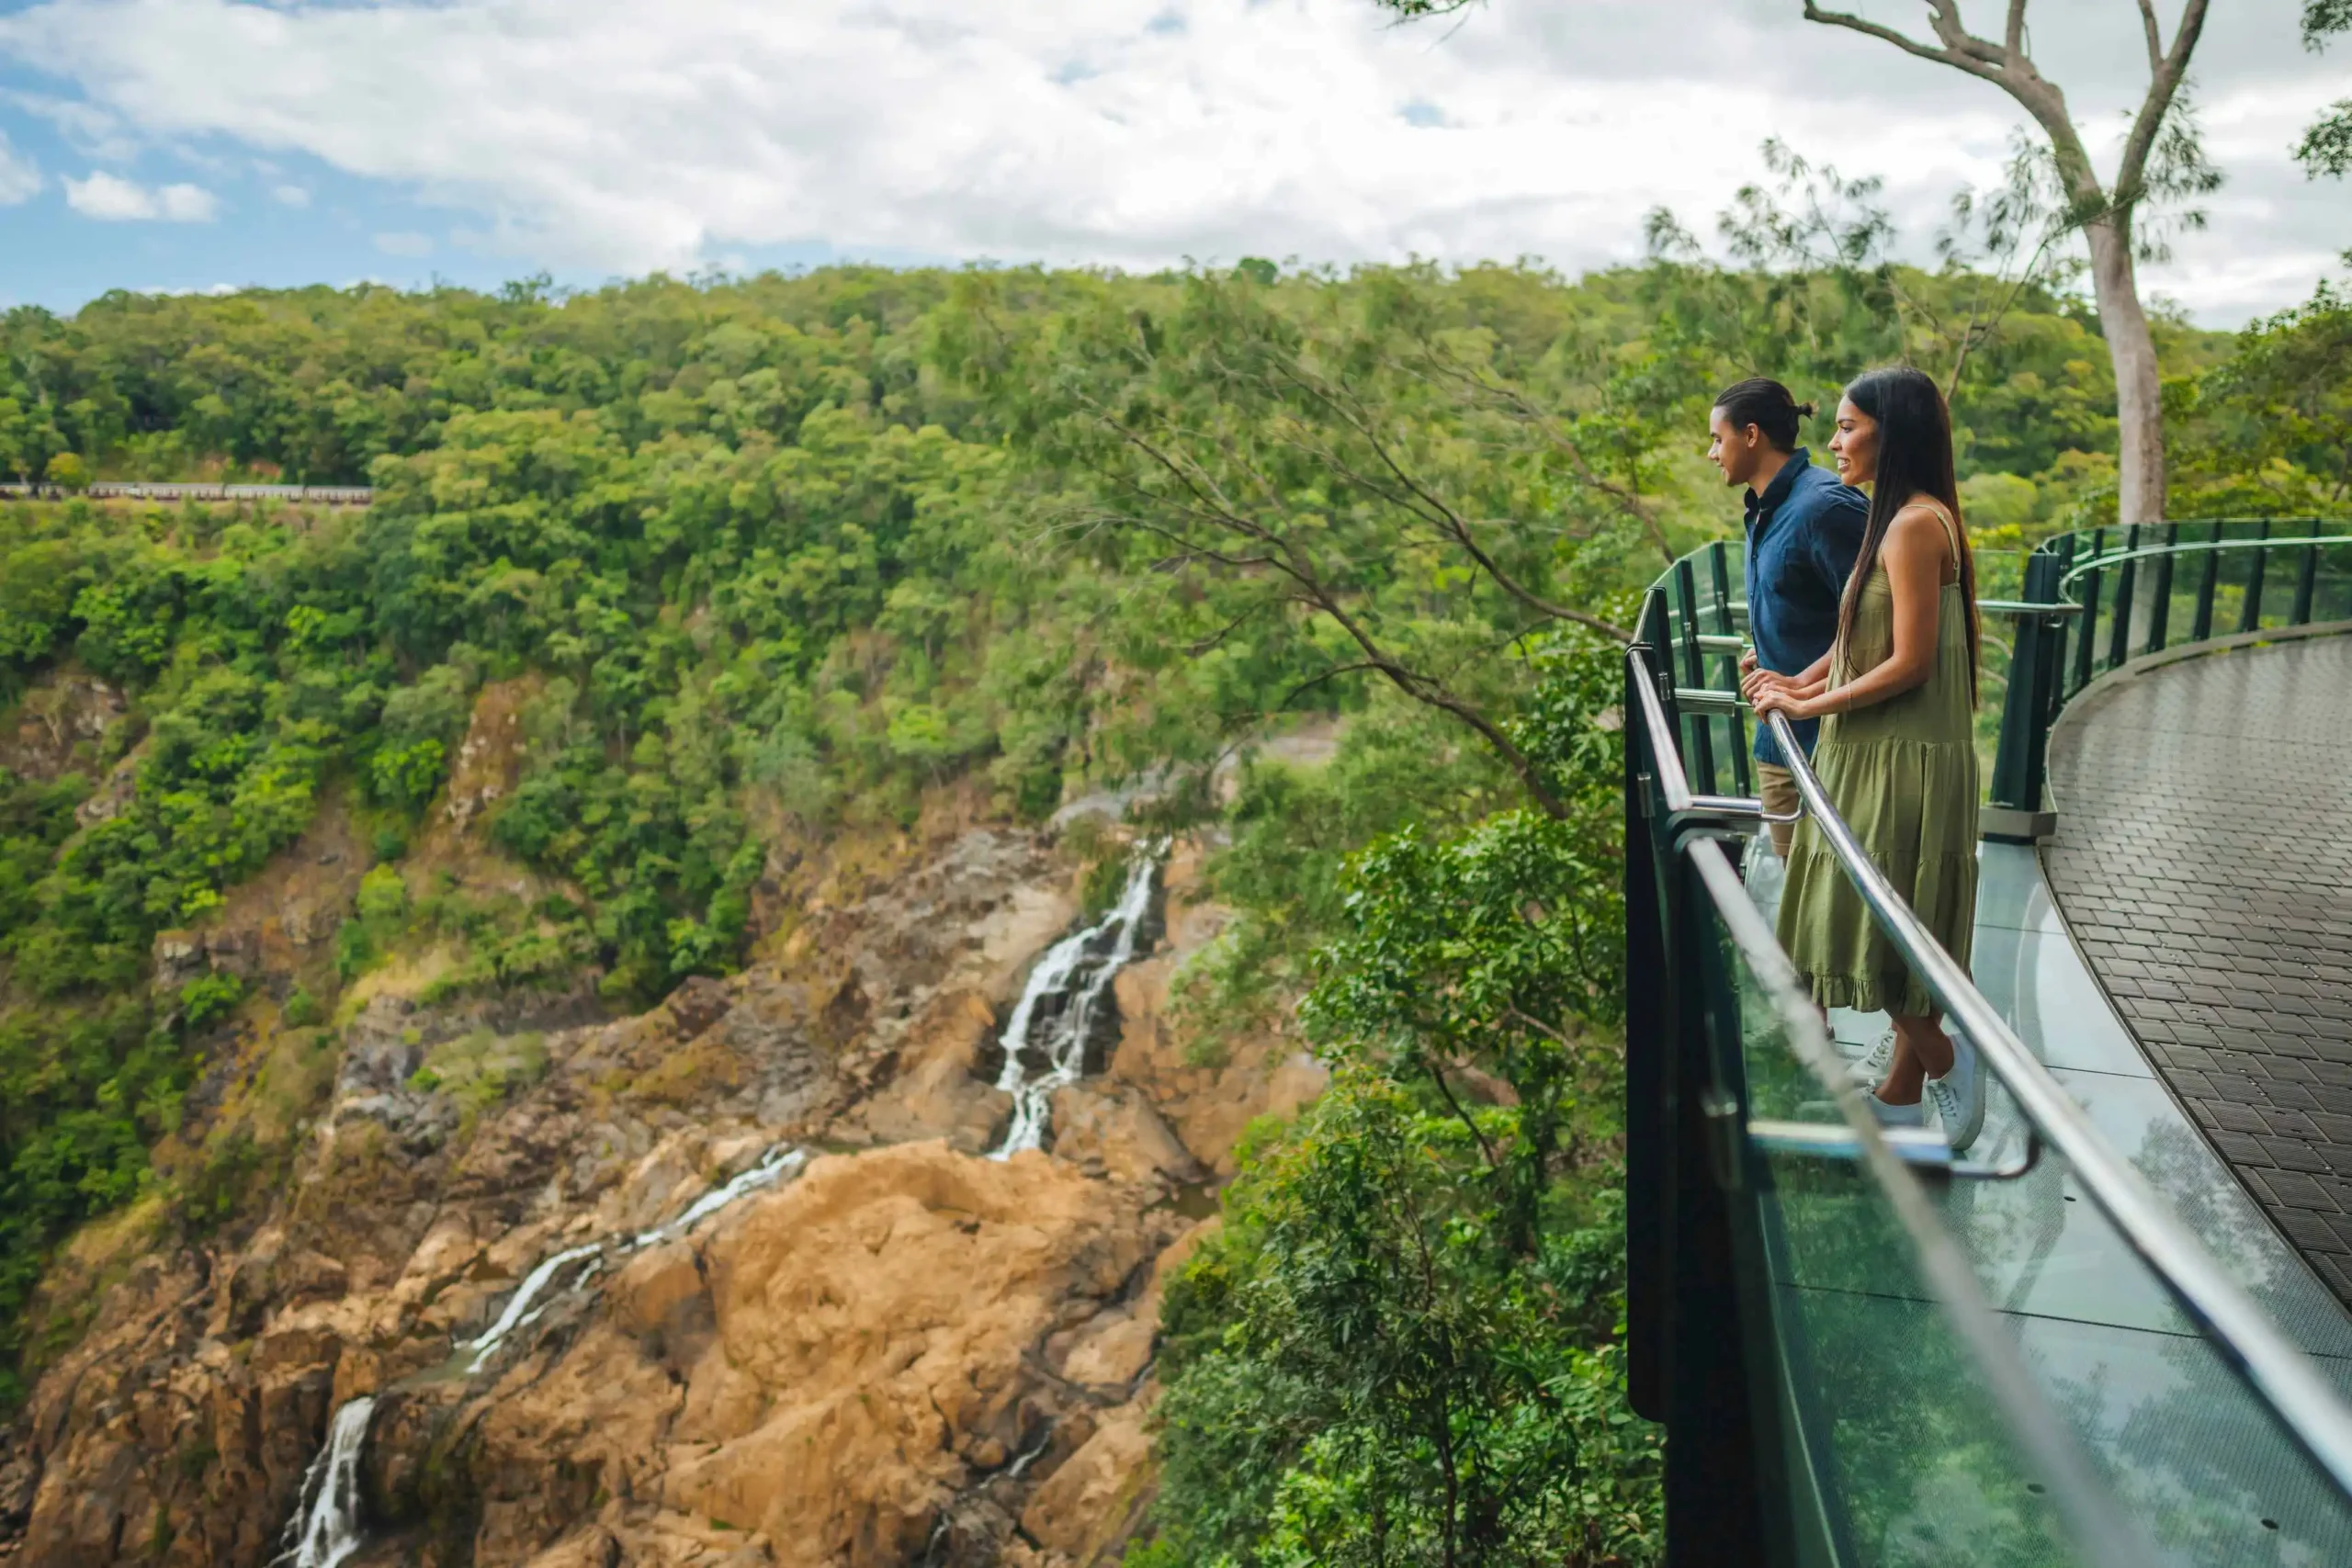 Skyrail's-The-Edge-Lookout.-Two-guests-standing-on-the-glass-edge-viewing-the-Barron-Falls